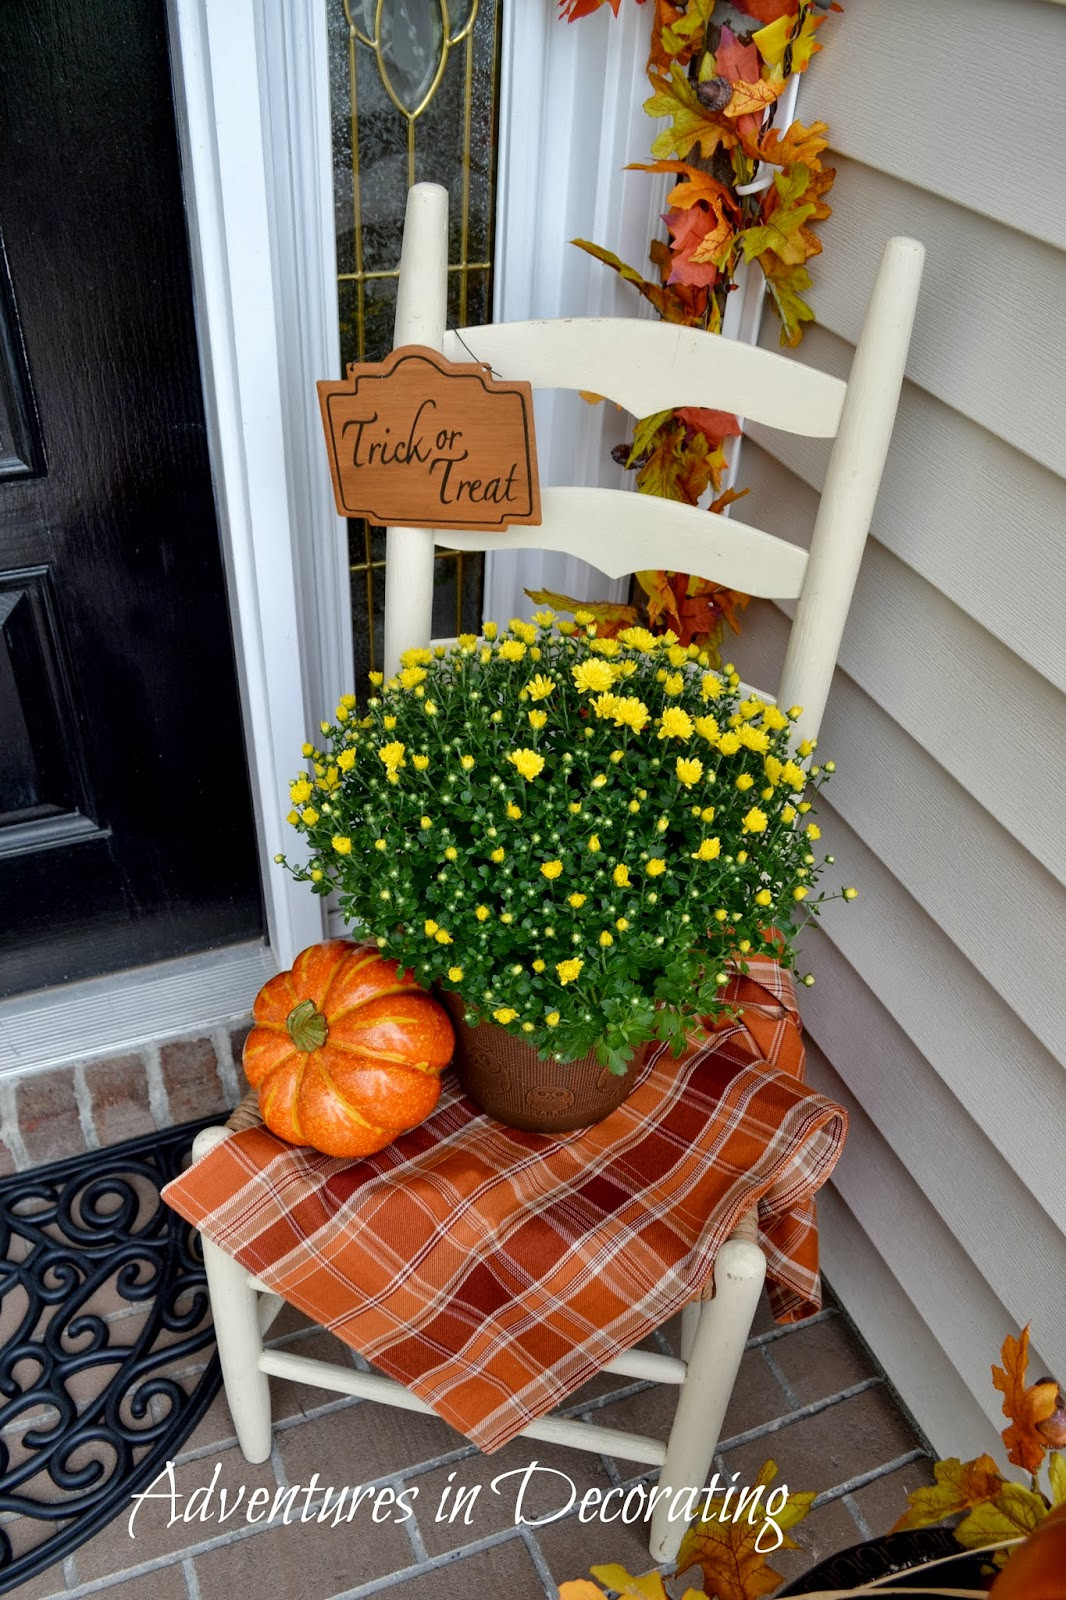 Fall Decoration For Front Porch
 Adventures in Decorating Our Fall Front Porch